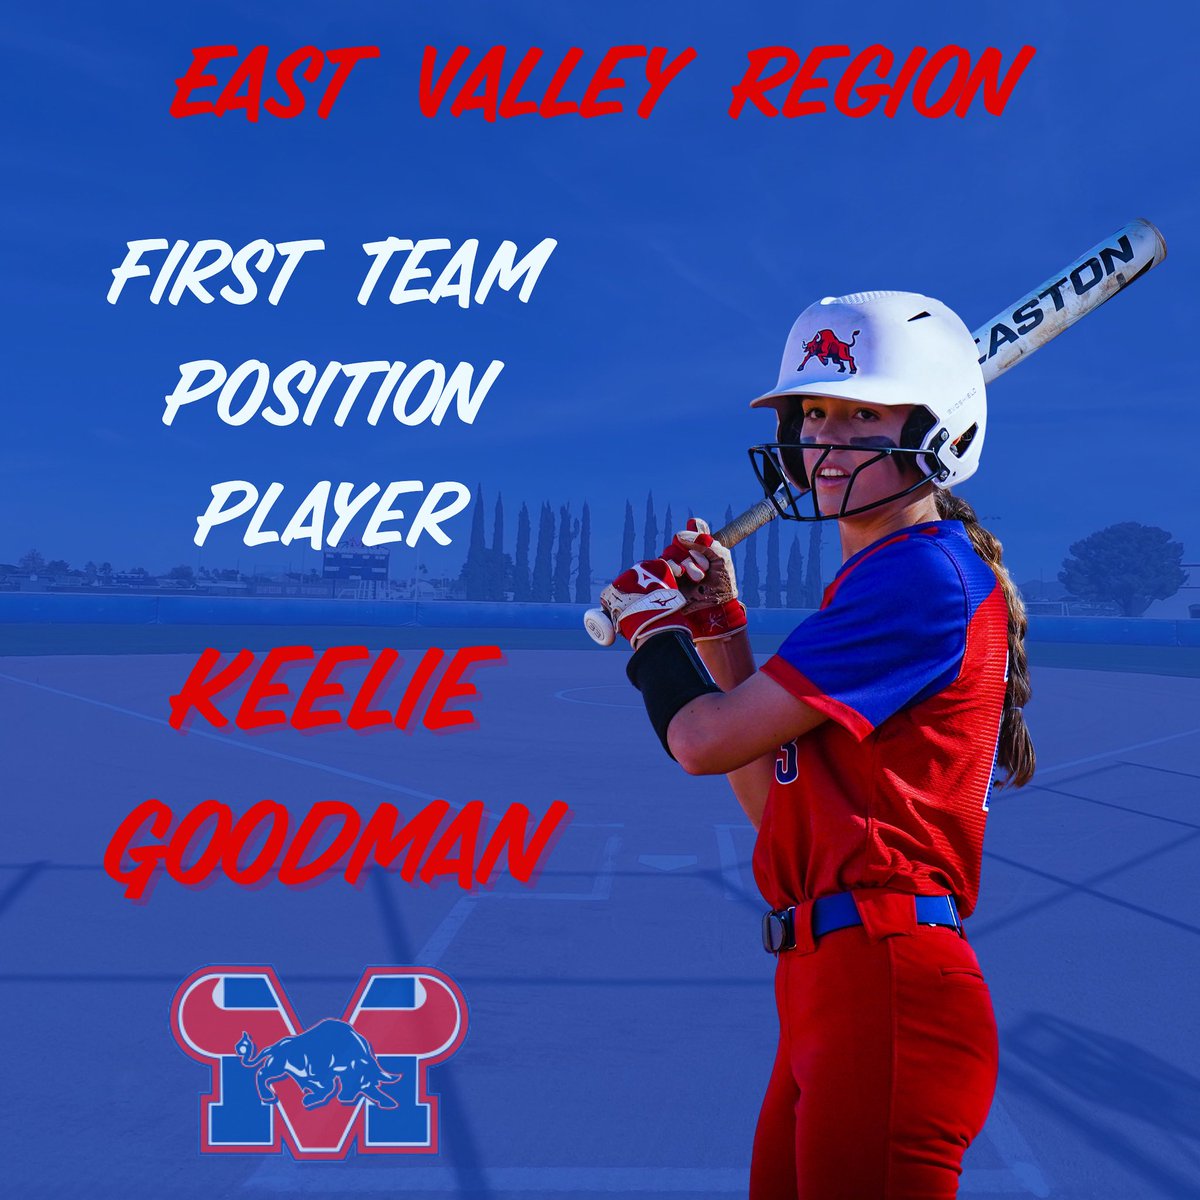 Sophomore Keelie Goodman is awarded First Team Position Player for East Valley Region. Congratulations on an outstanding season Keelie!